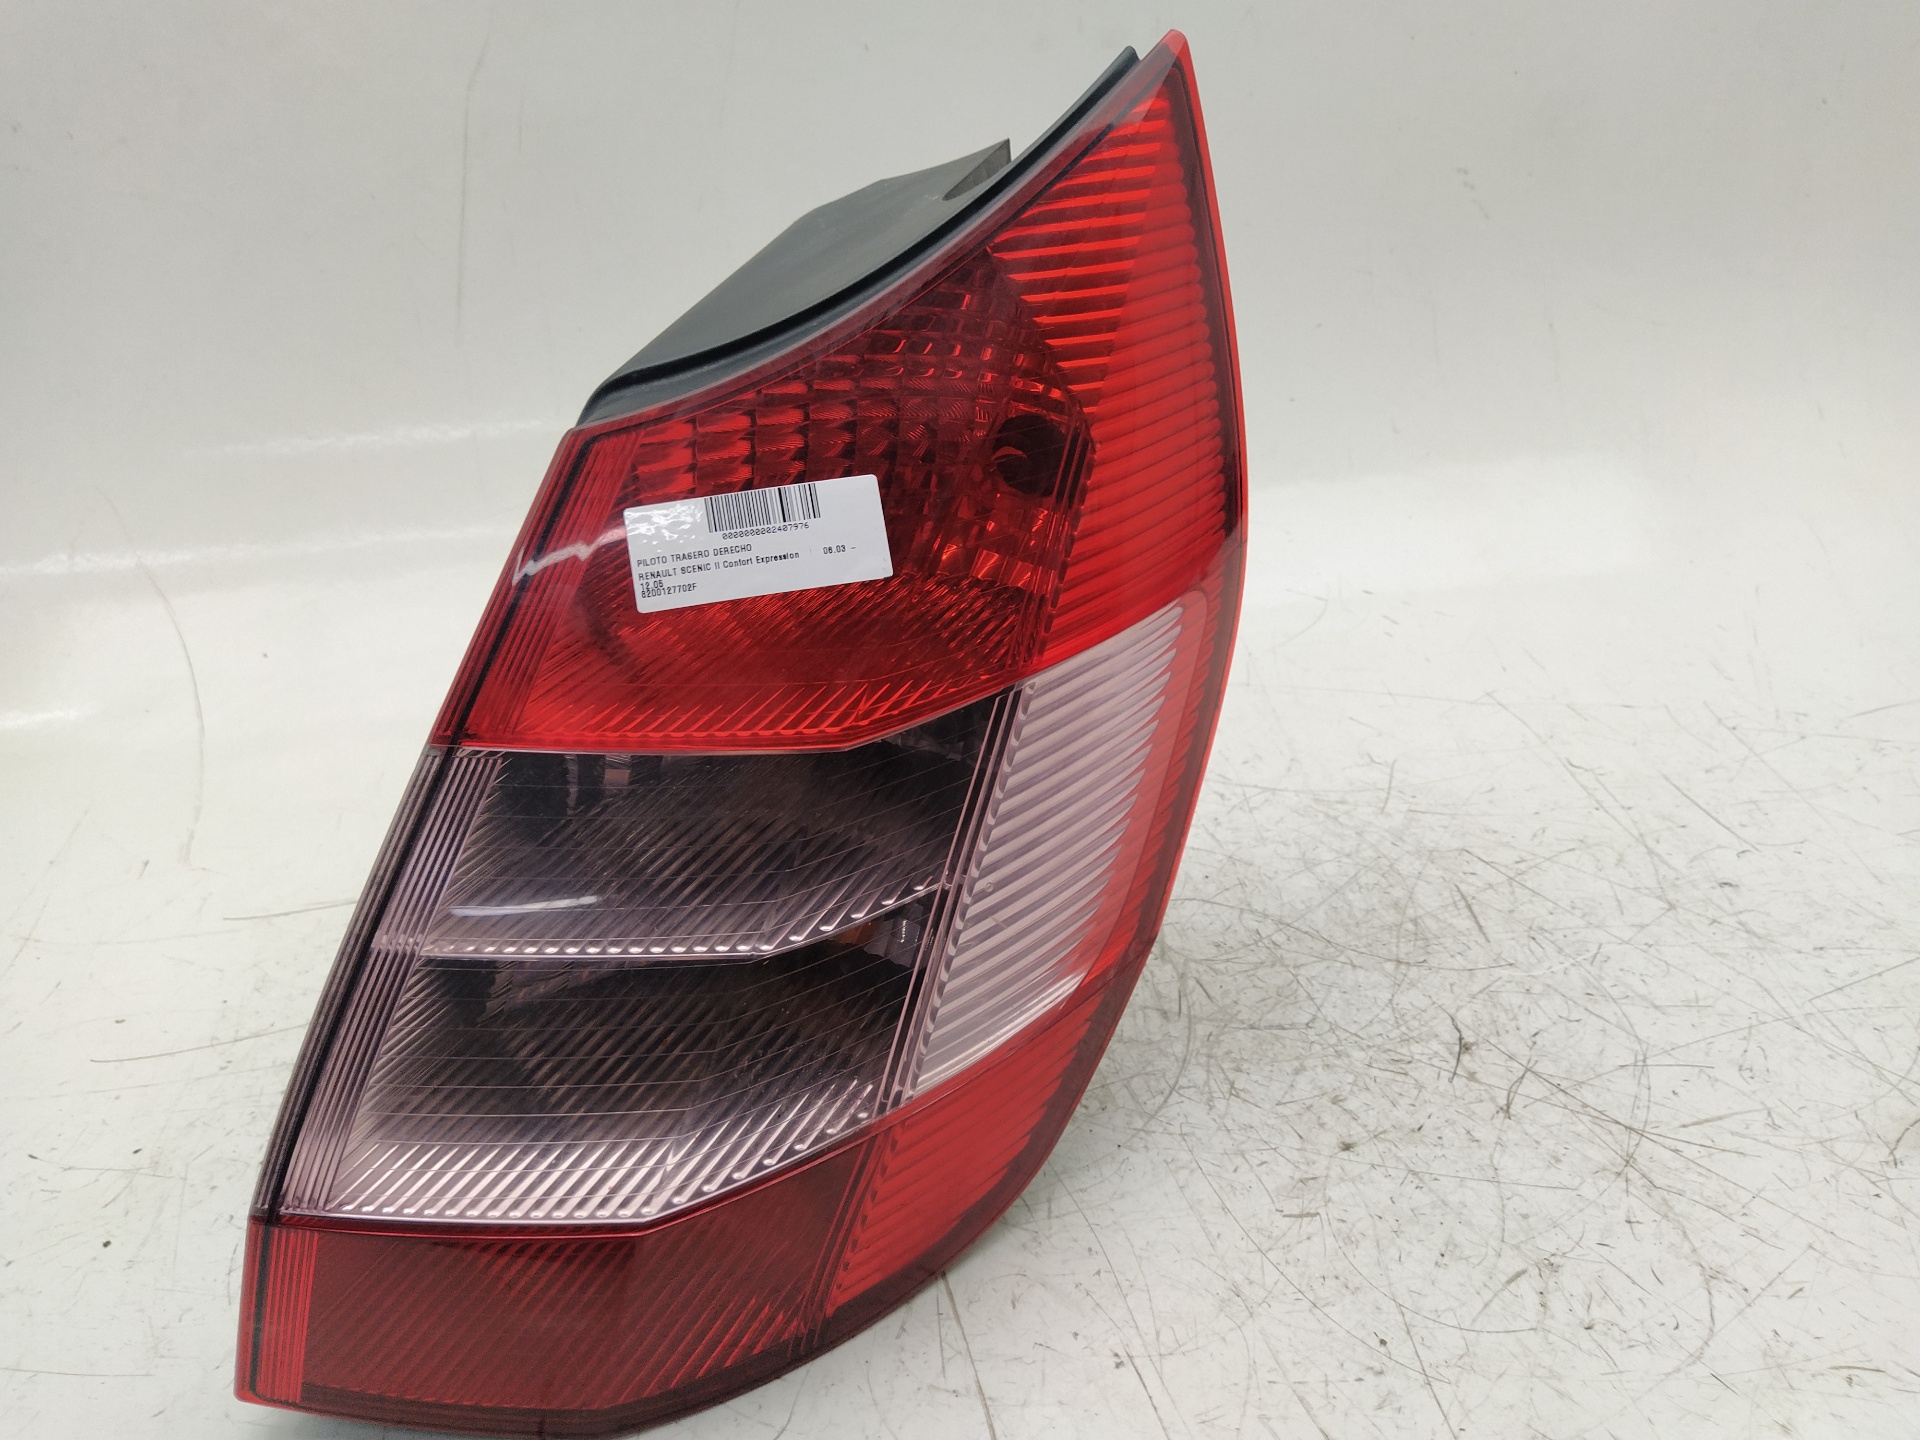 RENAULT Scenic 2 generation (2003-2010) Rear Right Taillight Lamp 8200127702F 25177221